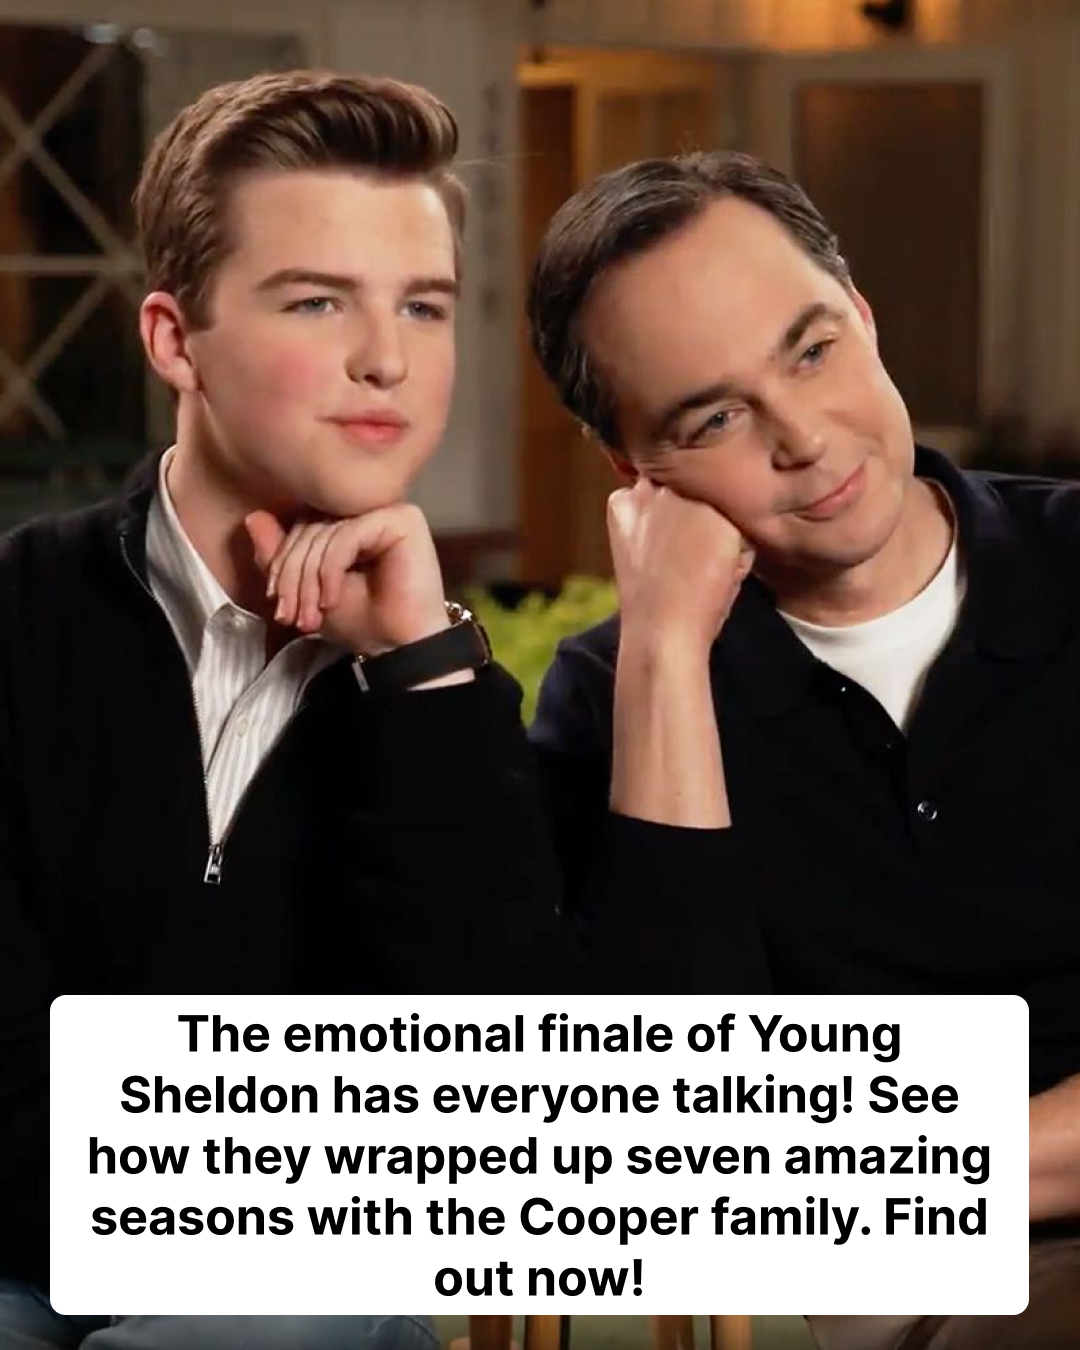 Young Sheldon Merges the Present with the Past in Poignant Series Finale: How It Ended After 7 Seasons